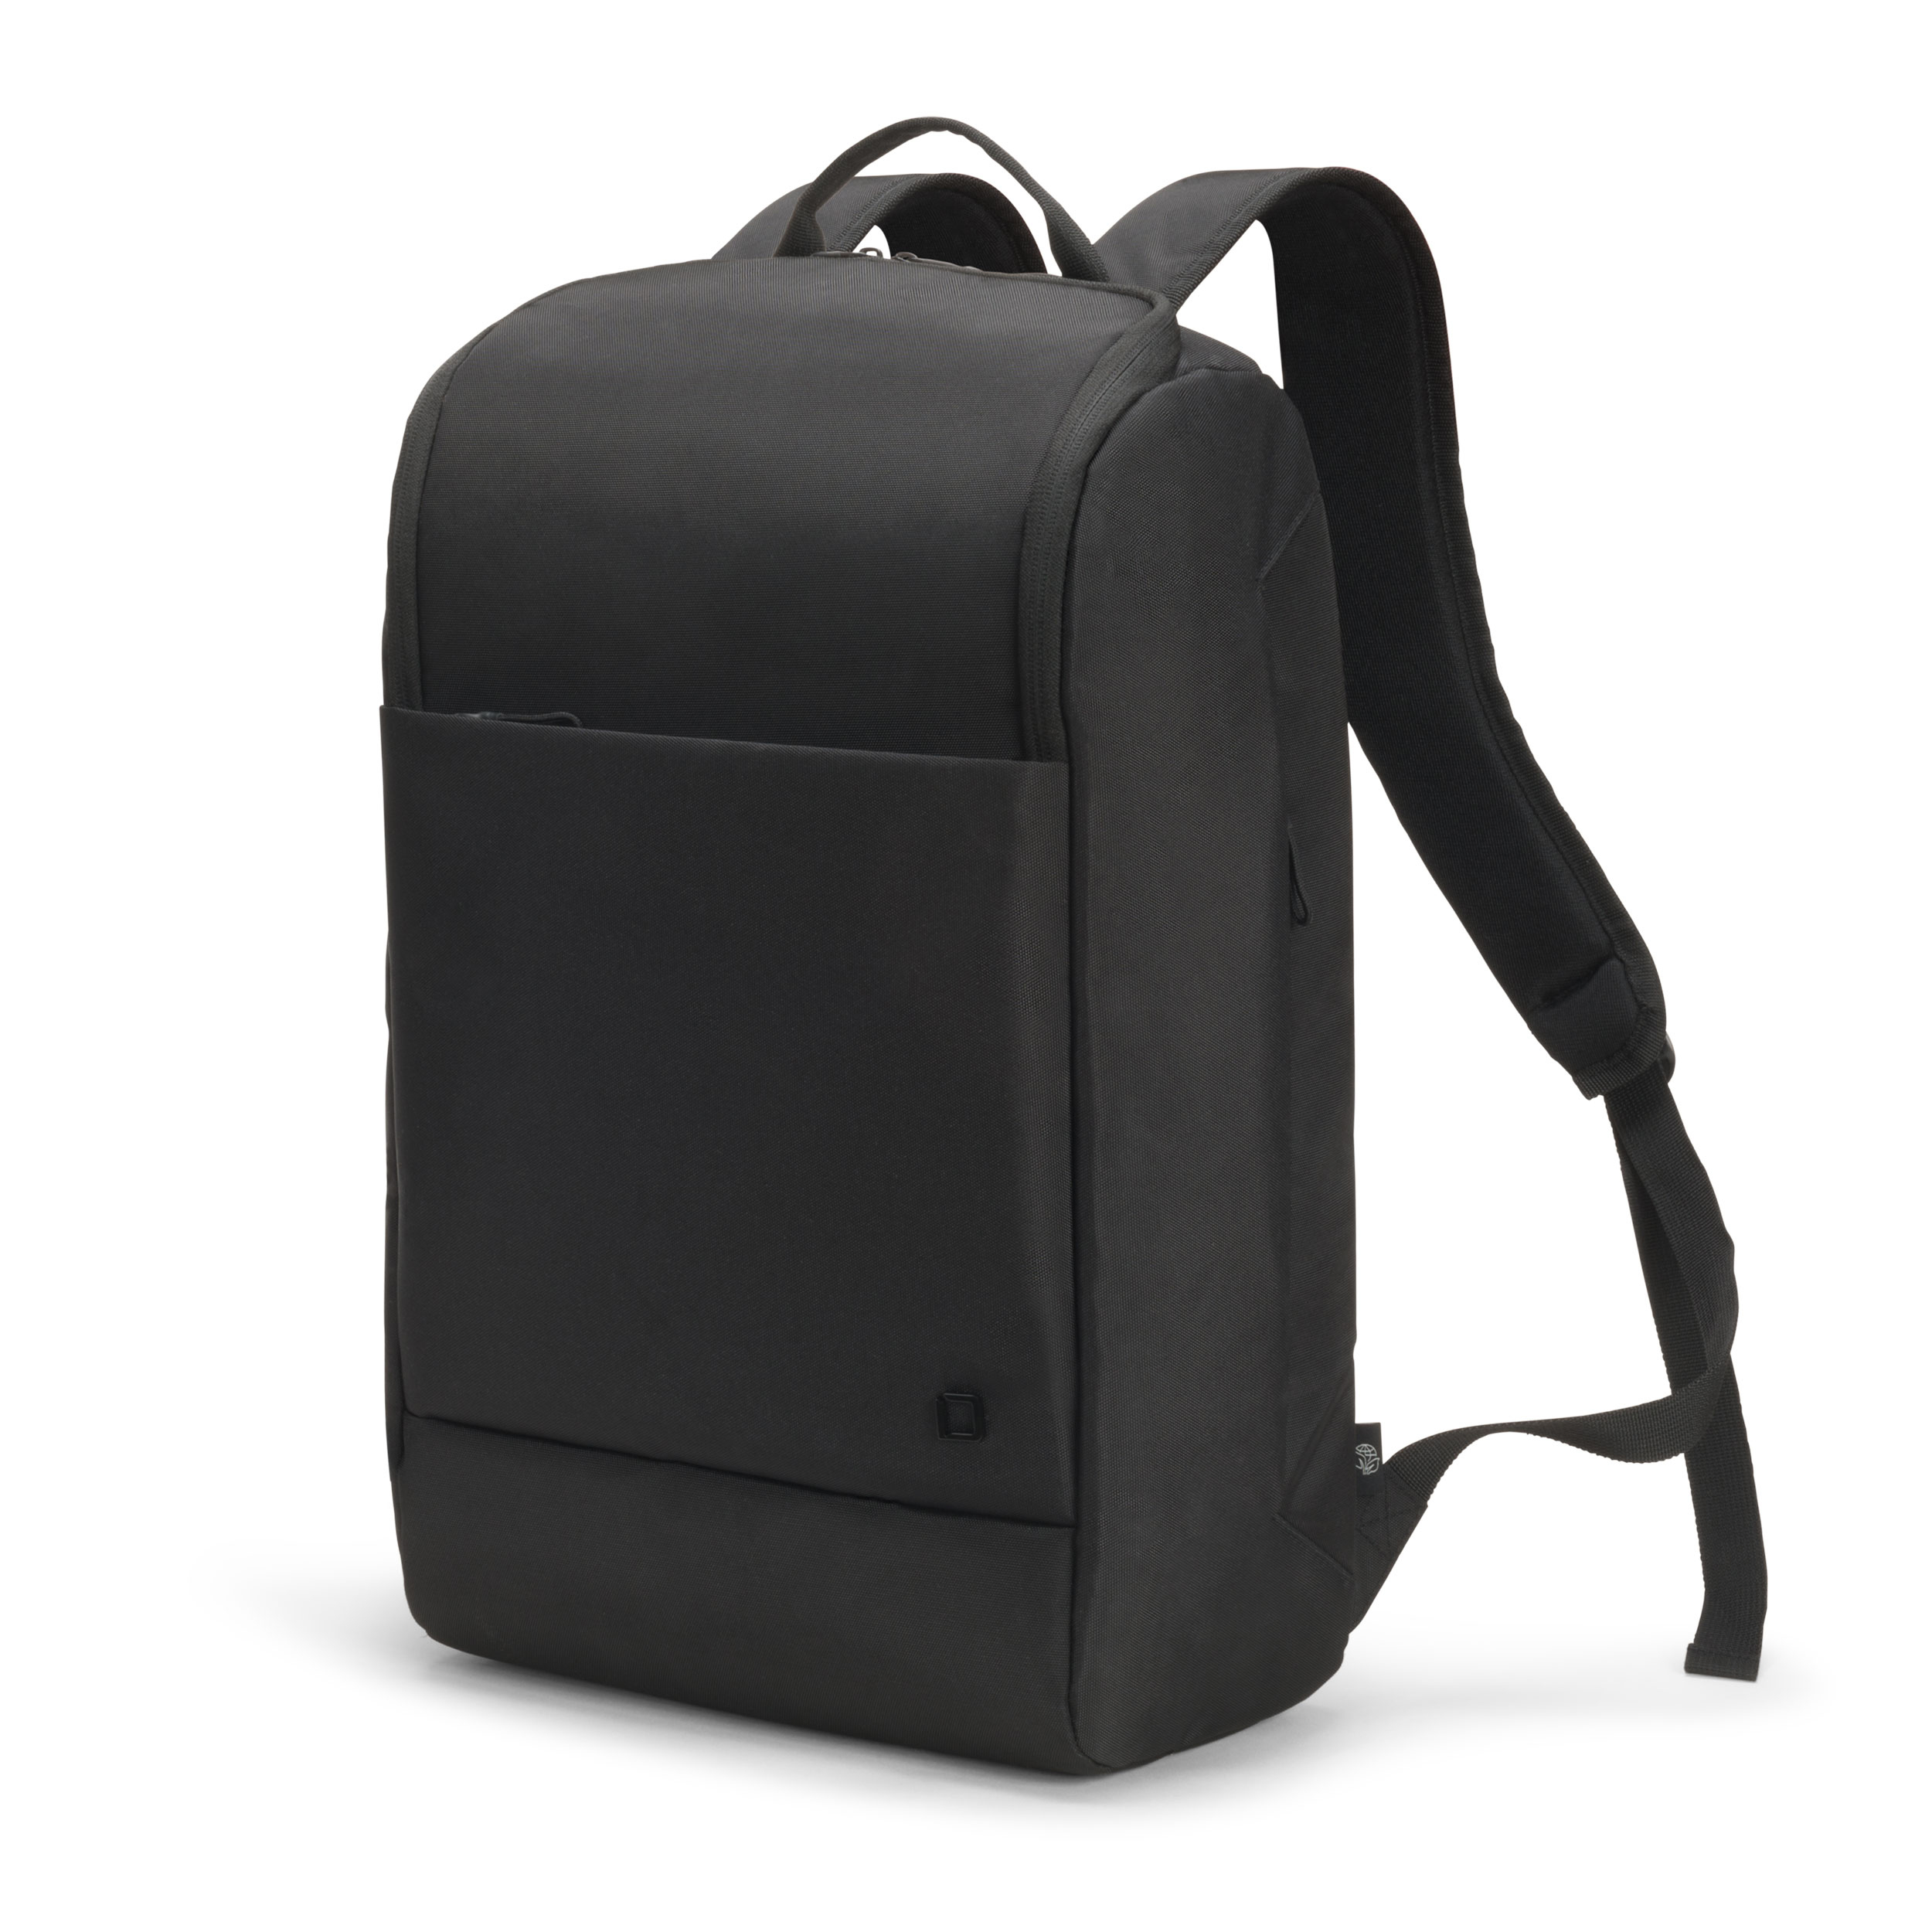 DICOTA Eco Backpack MOTION Black D31874-RPET for Universal 13 - 15.6 inch for Universal 13 - 15.6 in